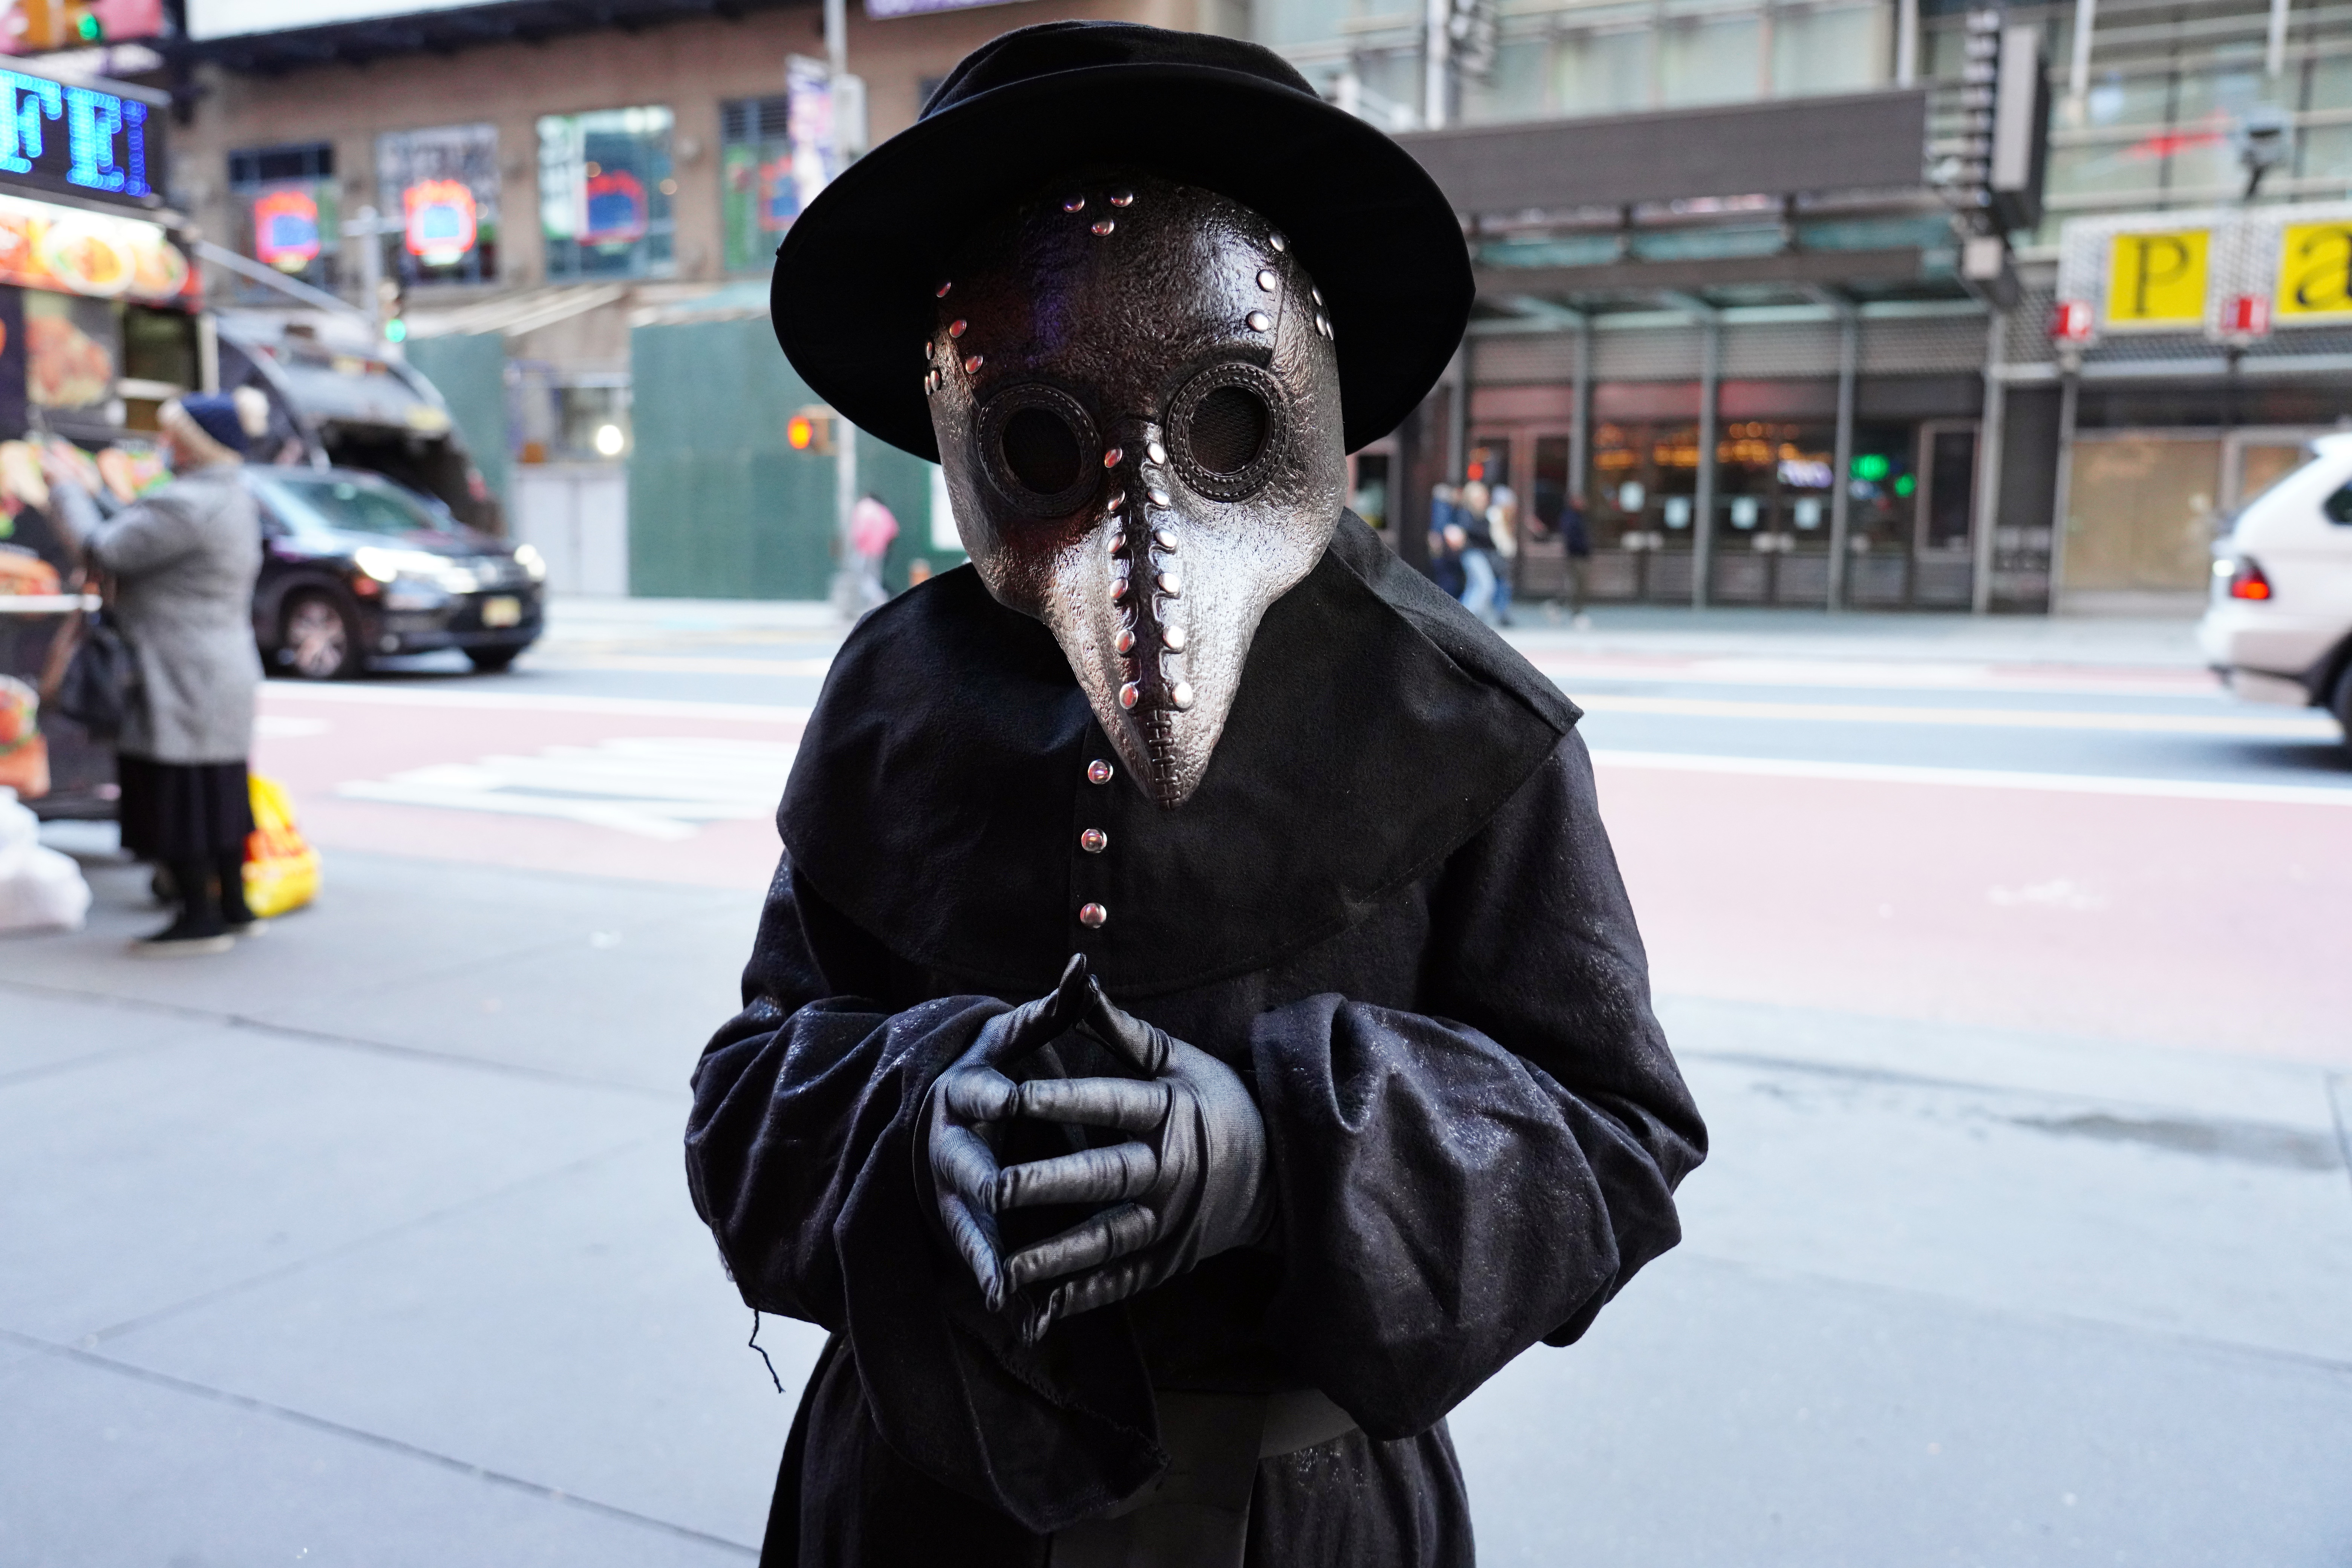 A person wears a plague doctor costume on October 31, 2020 in New York City. Many Halloween events have been canceled or adjusted with additional safety measures due to the ongoing coronavirus (COVID-19) pandemic. (Photo by Cindy Ord/Getty Images)